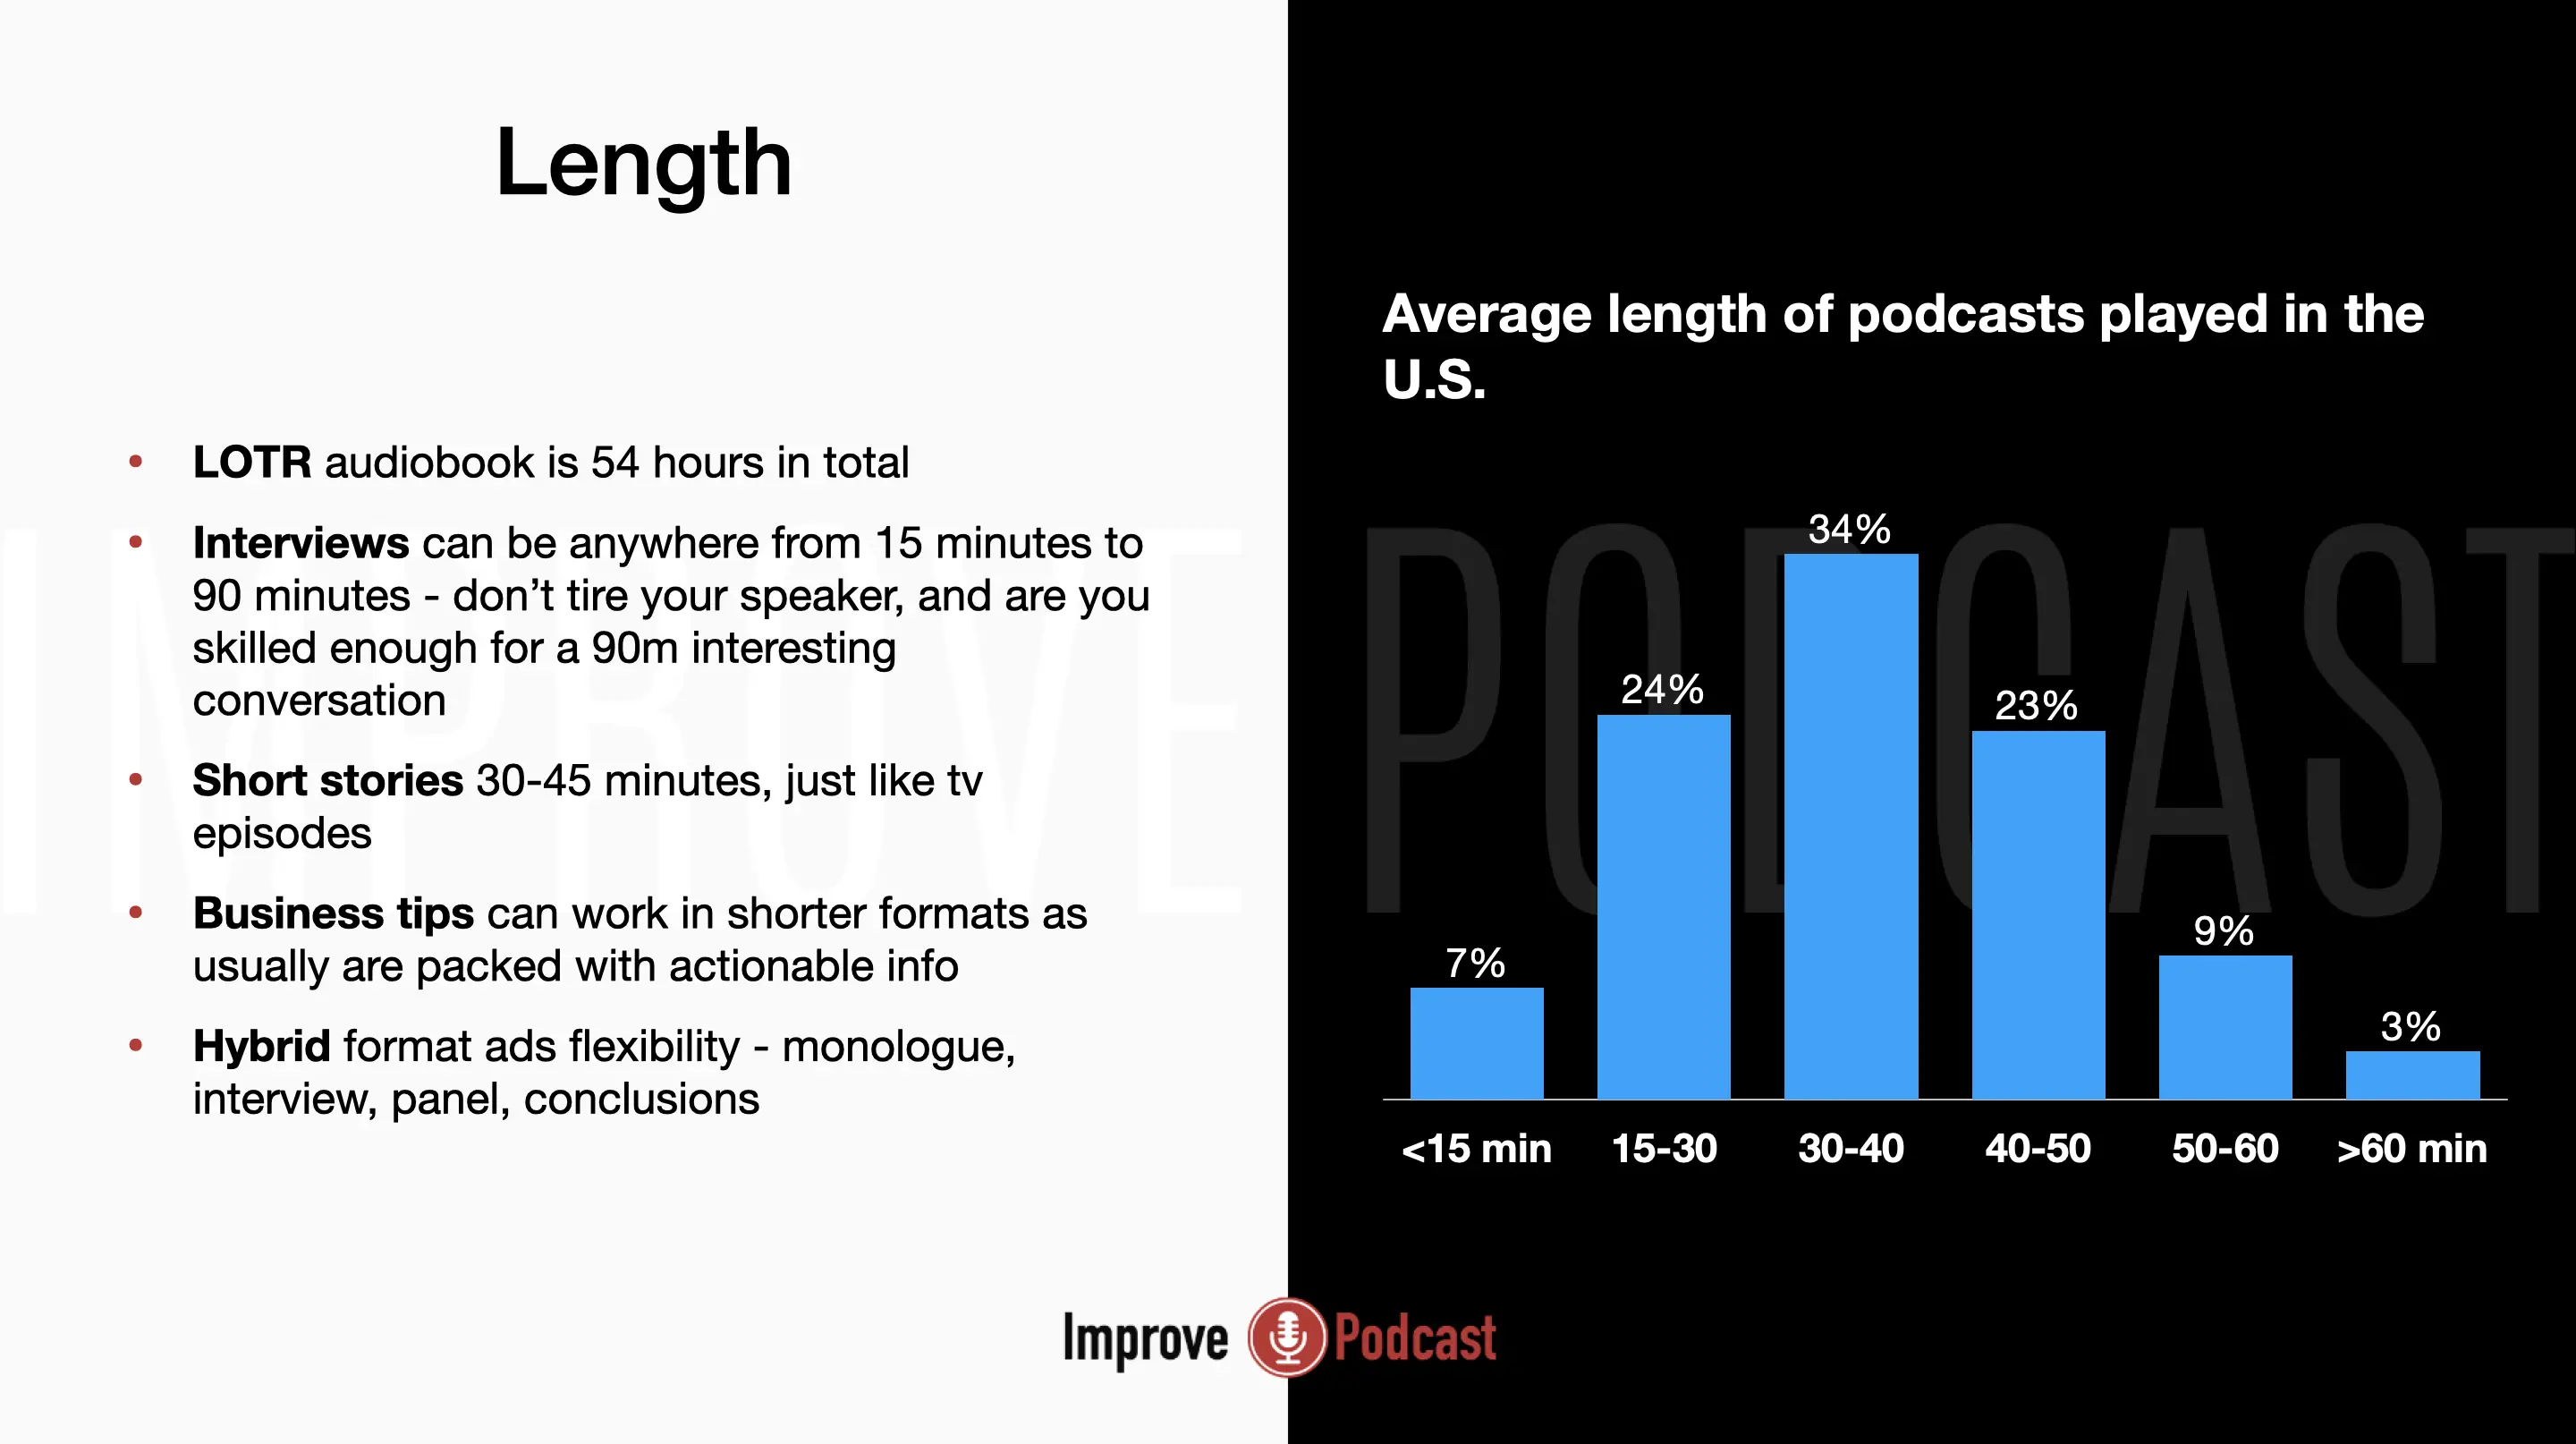 Average podcast length of shows played in the U.S.